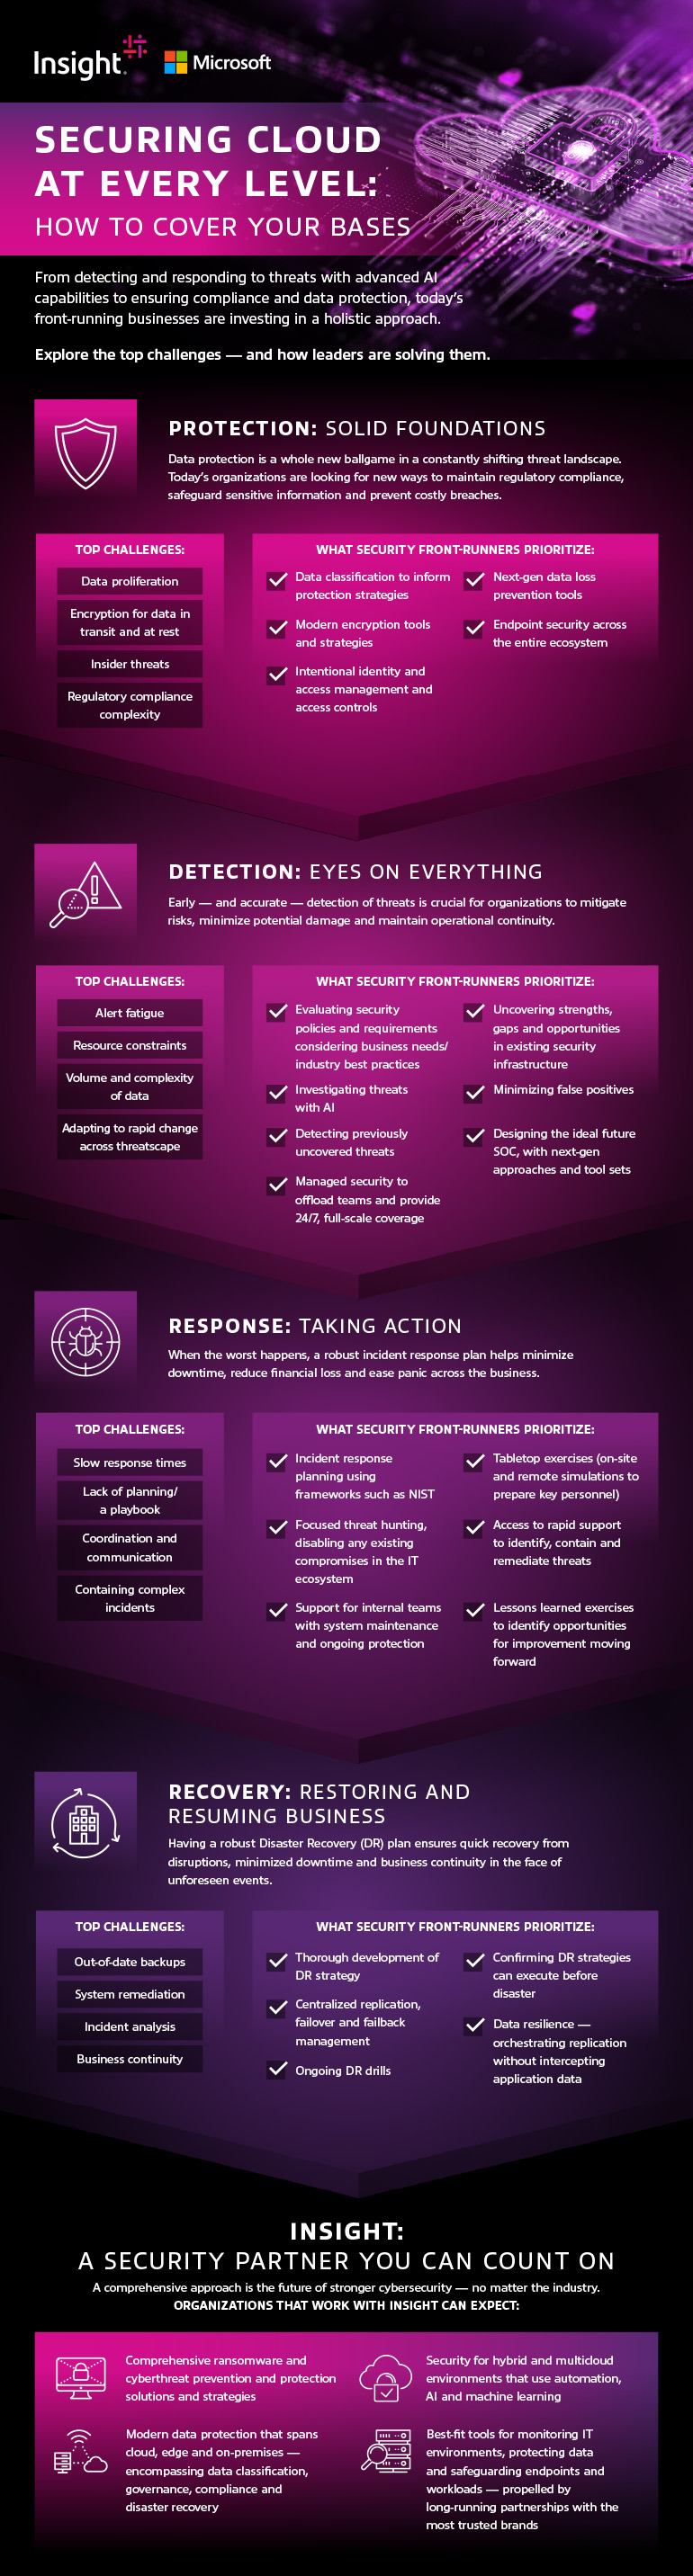 Securing Cloud at Every Level: How to Cover Your Bases infographic as transcribed below